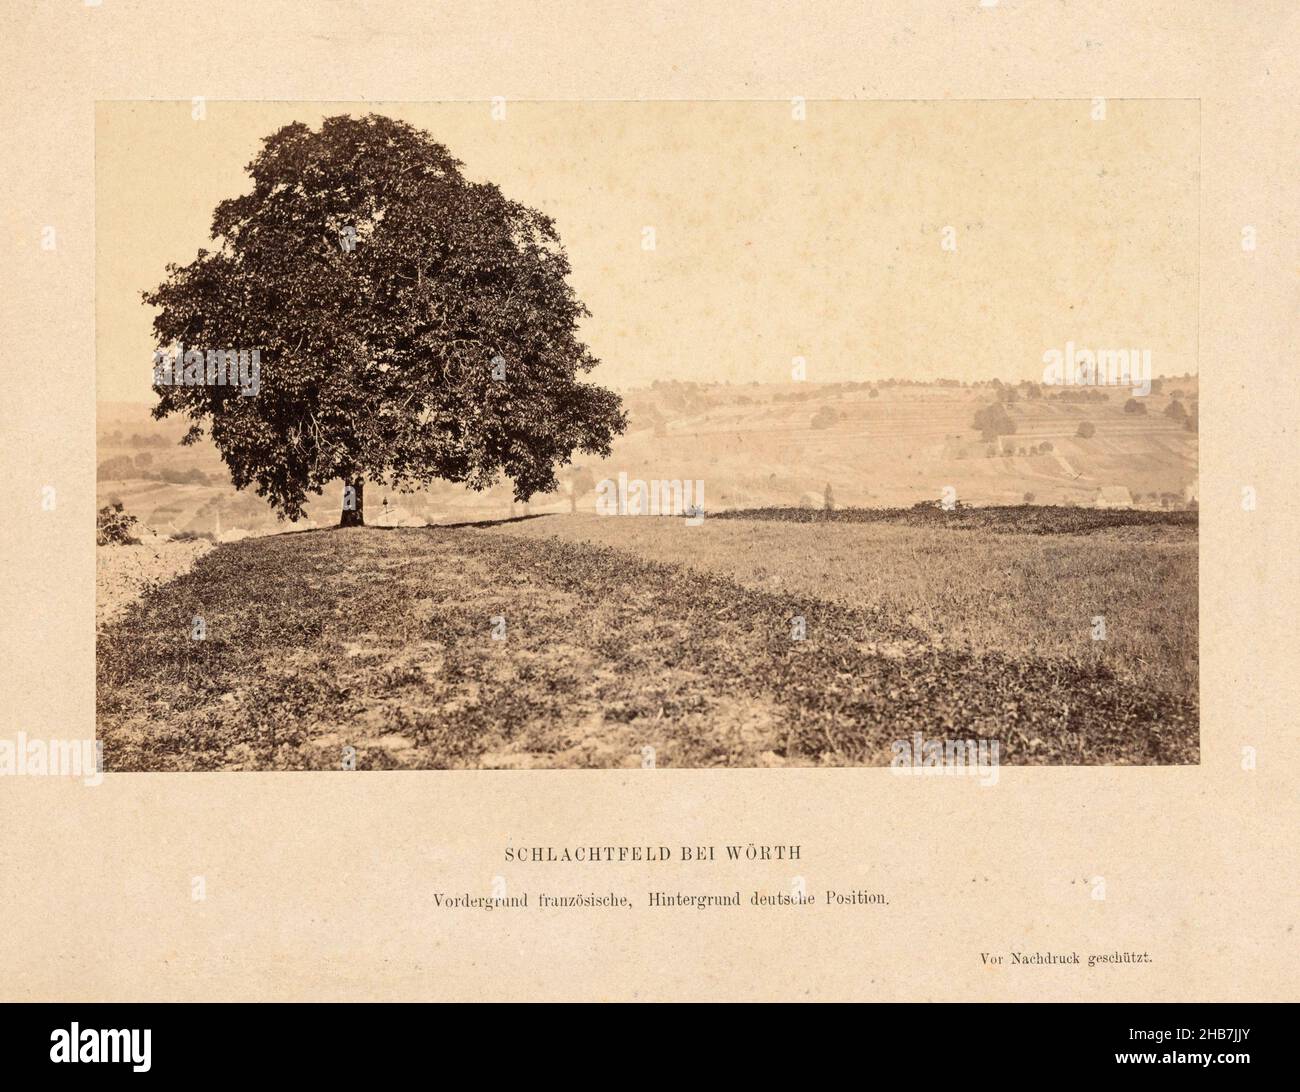 Site where the Battle of Wörth took place on August 6, 1870 during the Franco-German War, Schlachtfeld bei Wörth, anonymous, Woerth, 1870 - 1875, paper, cardboard, albumen print, letterpress printing, height 131 mm × width 217 mm, height 215 mm × width 283 mm Stock Photo